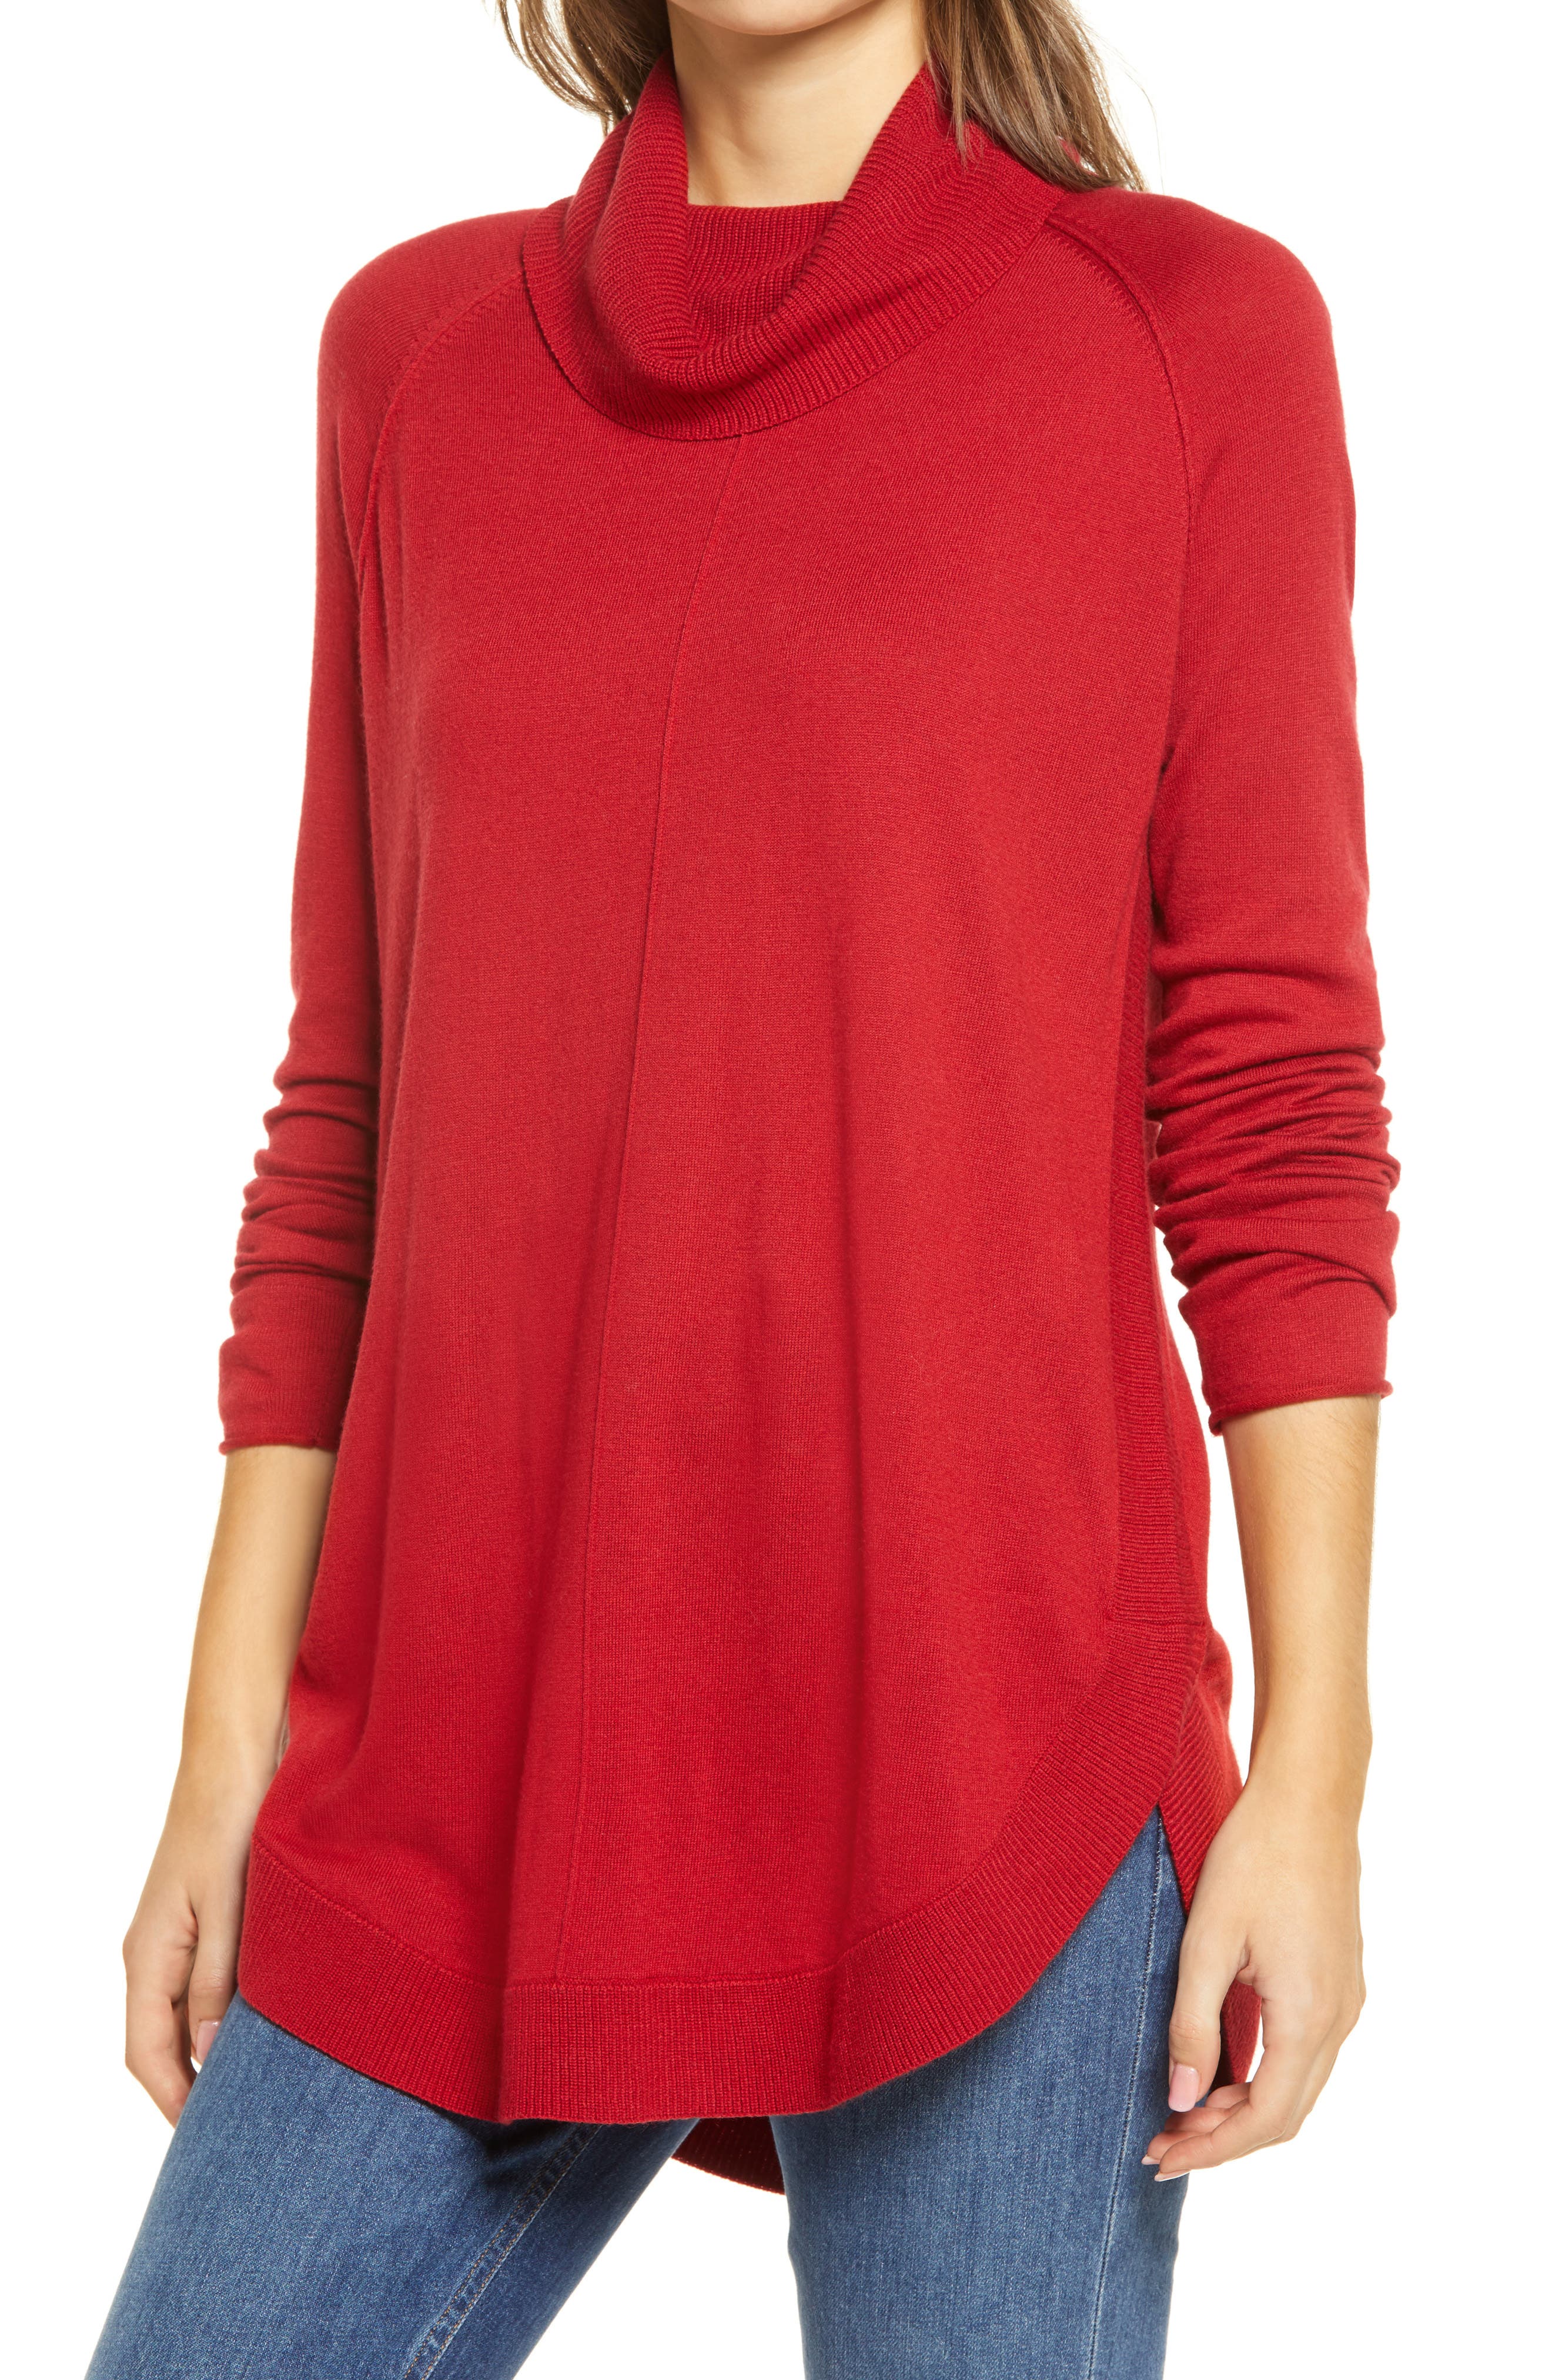 Caslon Turtleneck Tunic Sweater In Red Chili